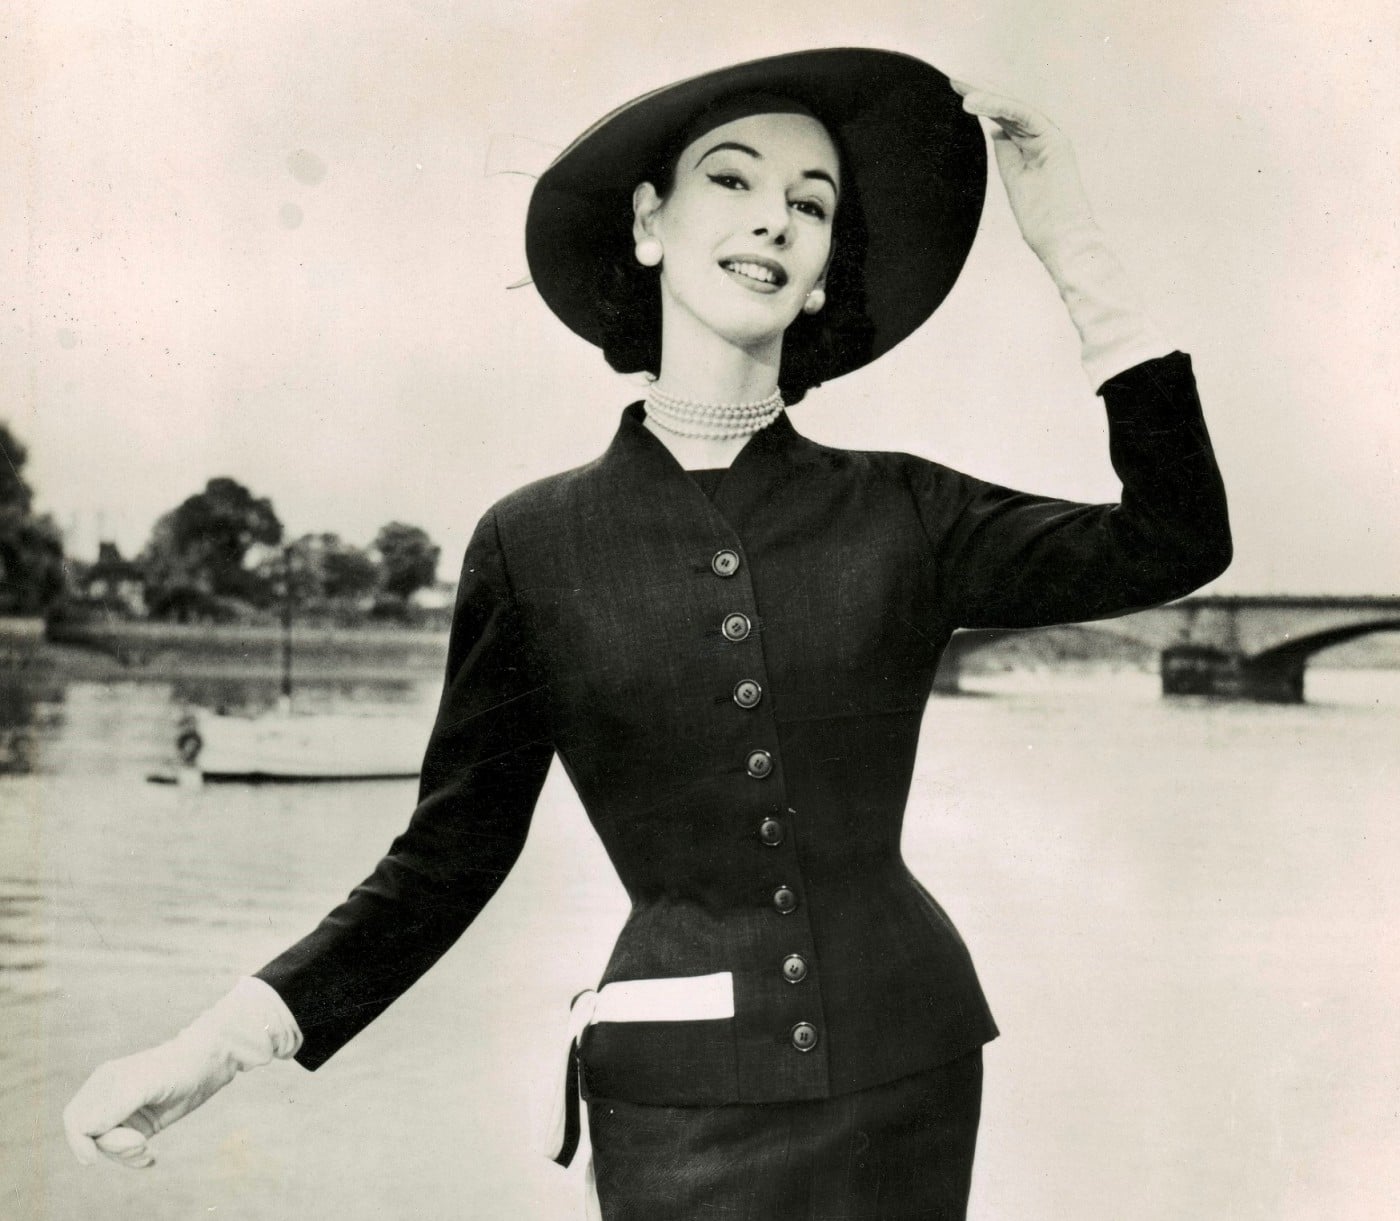 June modelling a tailored wool suit holding the brim of her picture hat about 1951-52 location and photographer unknown (2)